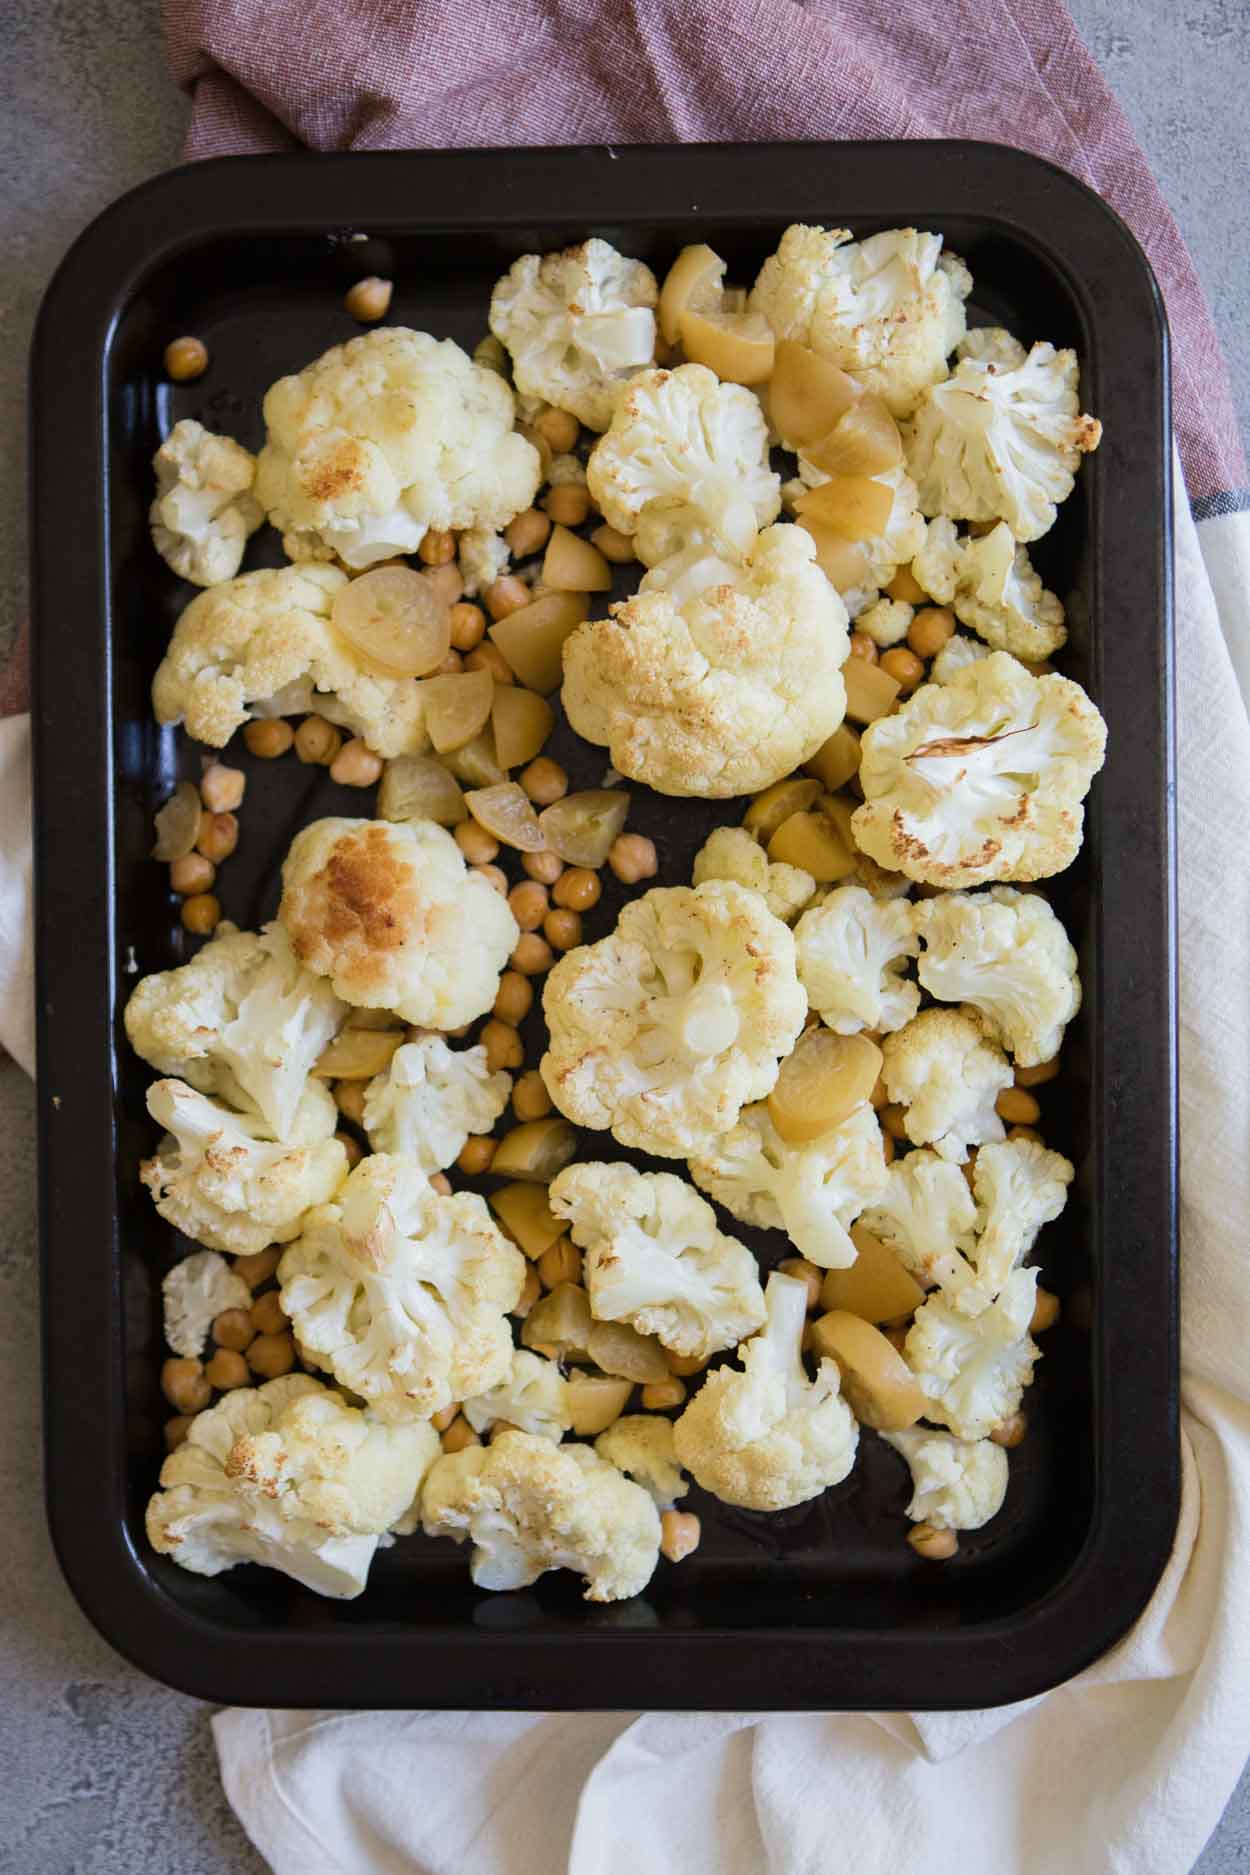 cauliflower, chickpeas, and preserved lemons on a baking sheet